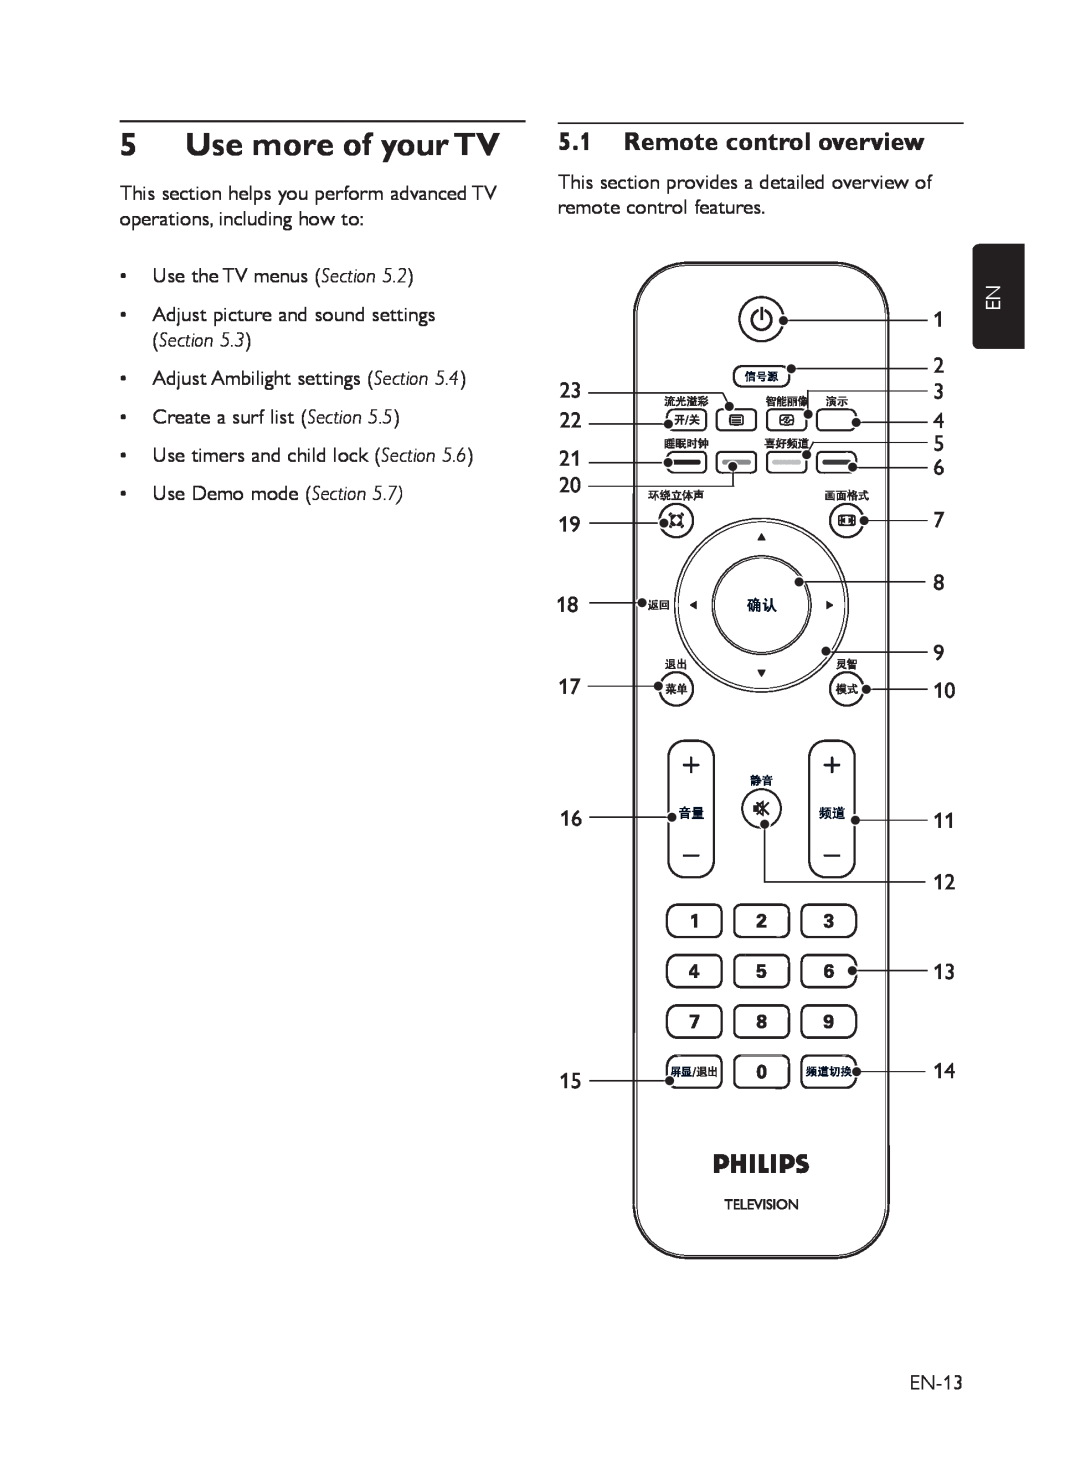 Philips 42PFL7403, 52PFL7403, 42PFL5203, 52PFL5403, 42PFL5403, 42PFL7603 Use more of your TV, 5.1Remote control overview 